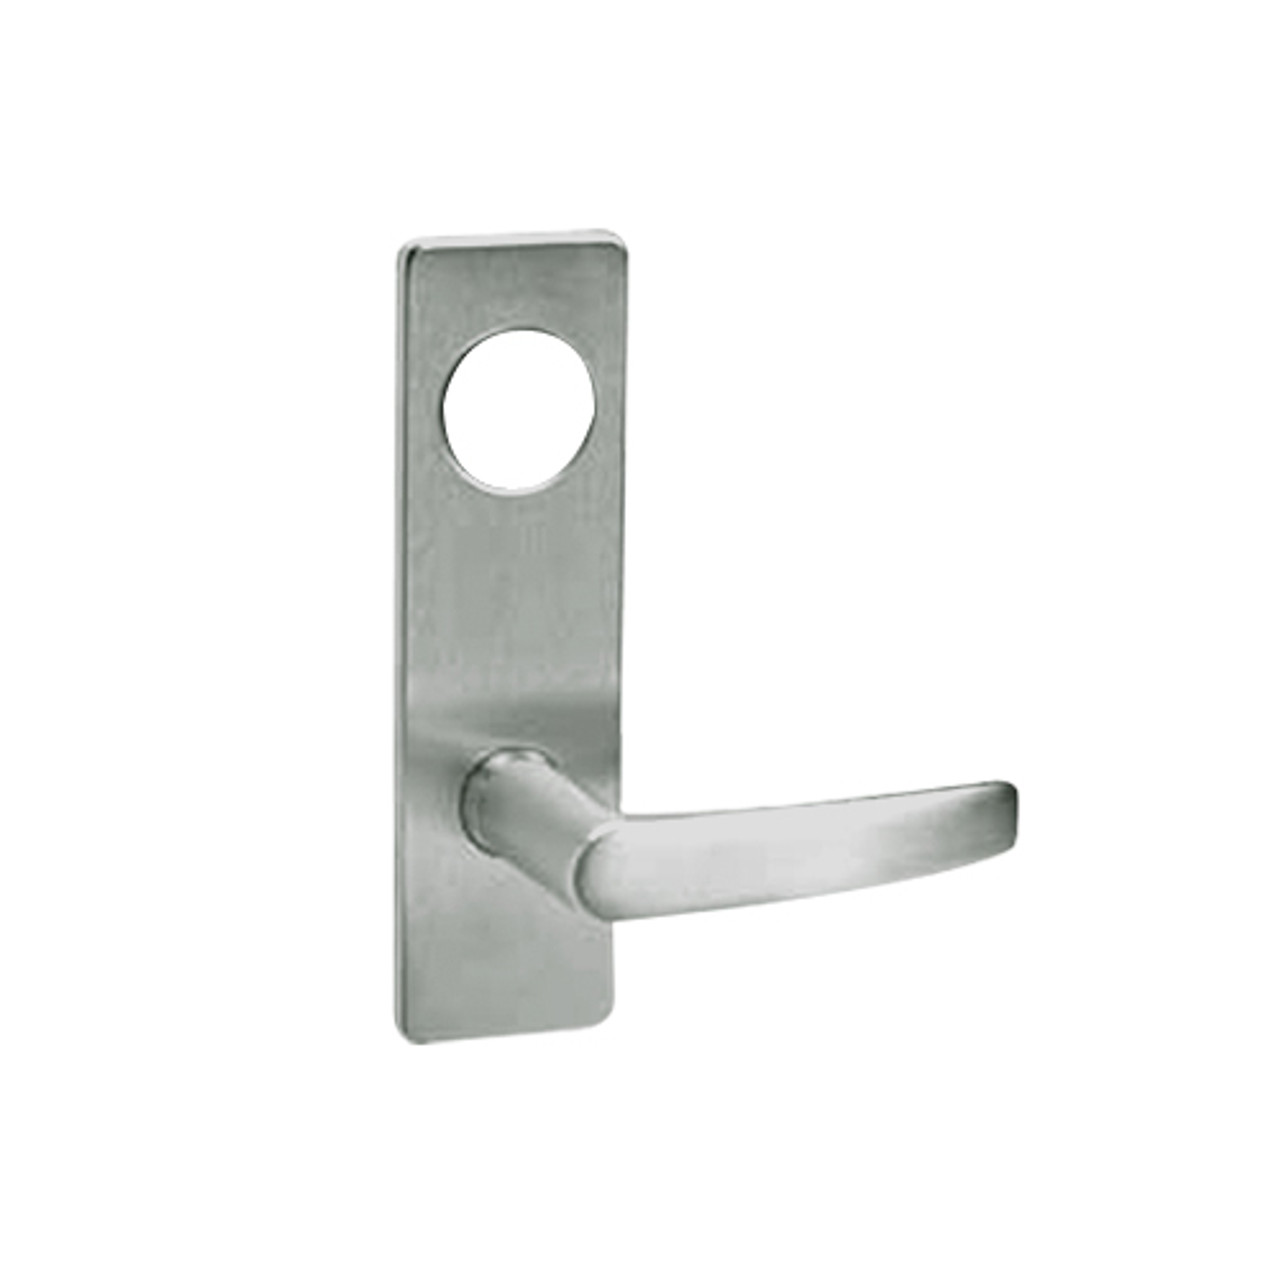 ML2058-ASM-619-M31 Corbin Russwin ML2000 Series Mortise Entrance Holdback Trim Pack with Armstrong Lever in Satin Nickel